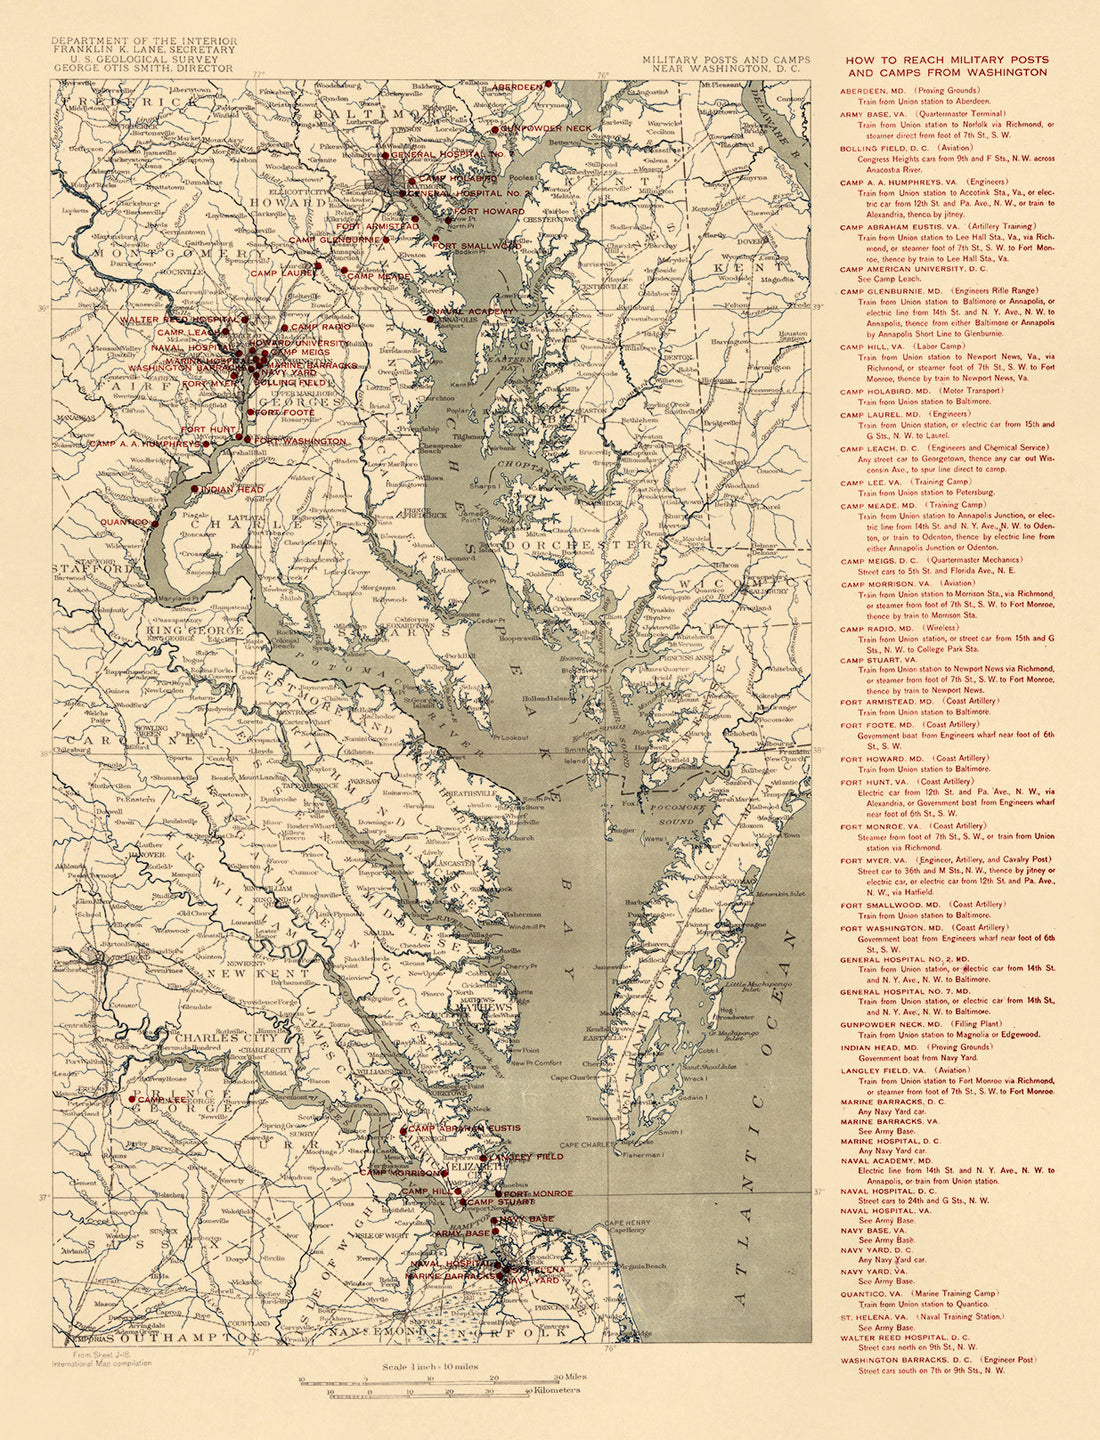 Military Posts and Camps Near Washington, D.C 1926